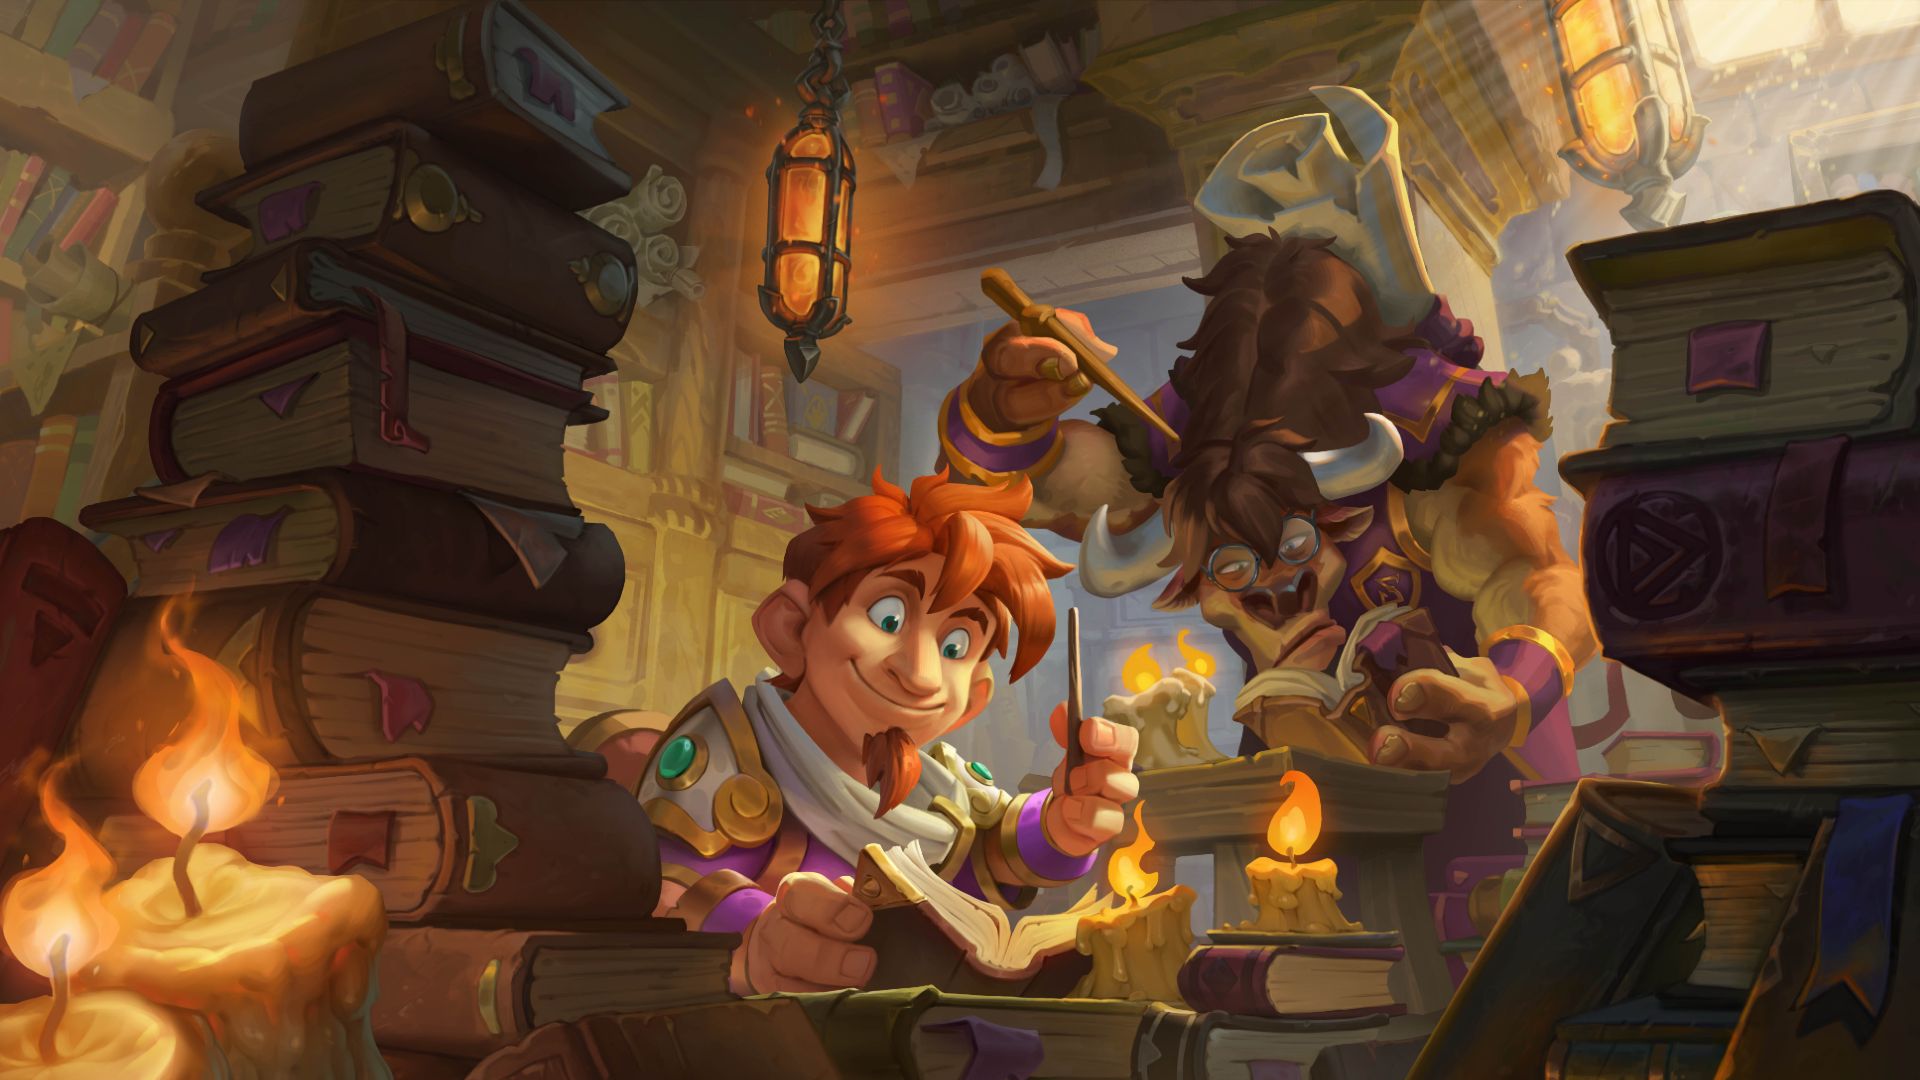 Scholomance Academy reminds me there's no place like Hearthstone | PCGamesN